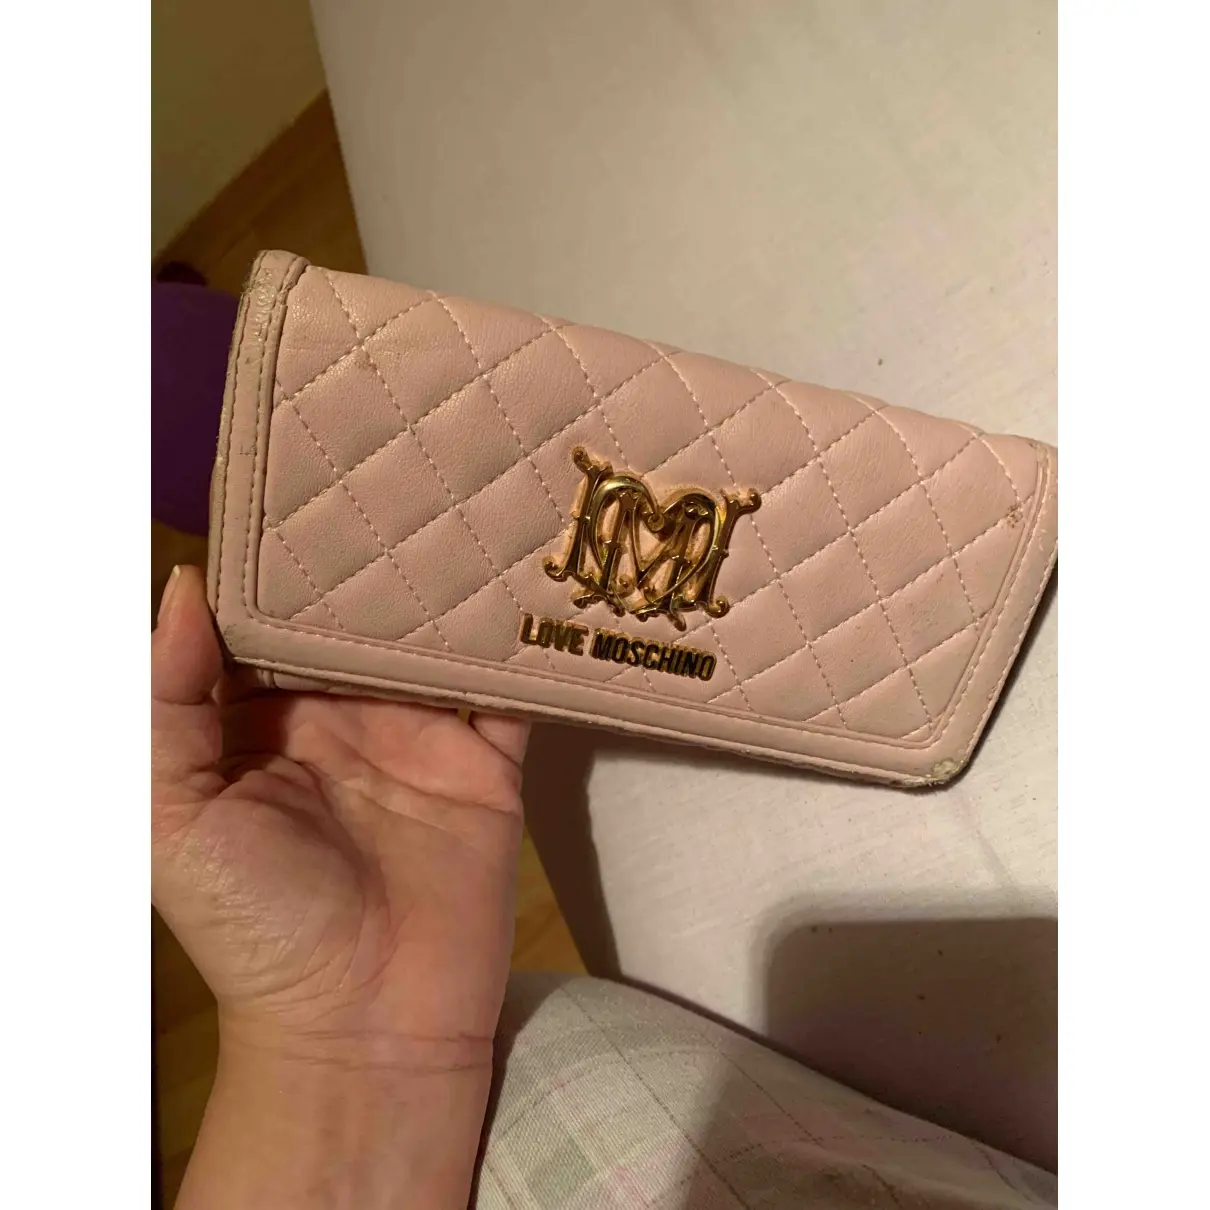 Leather wallet Moschino